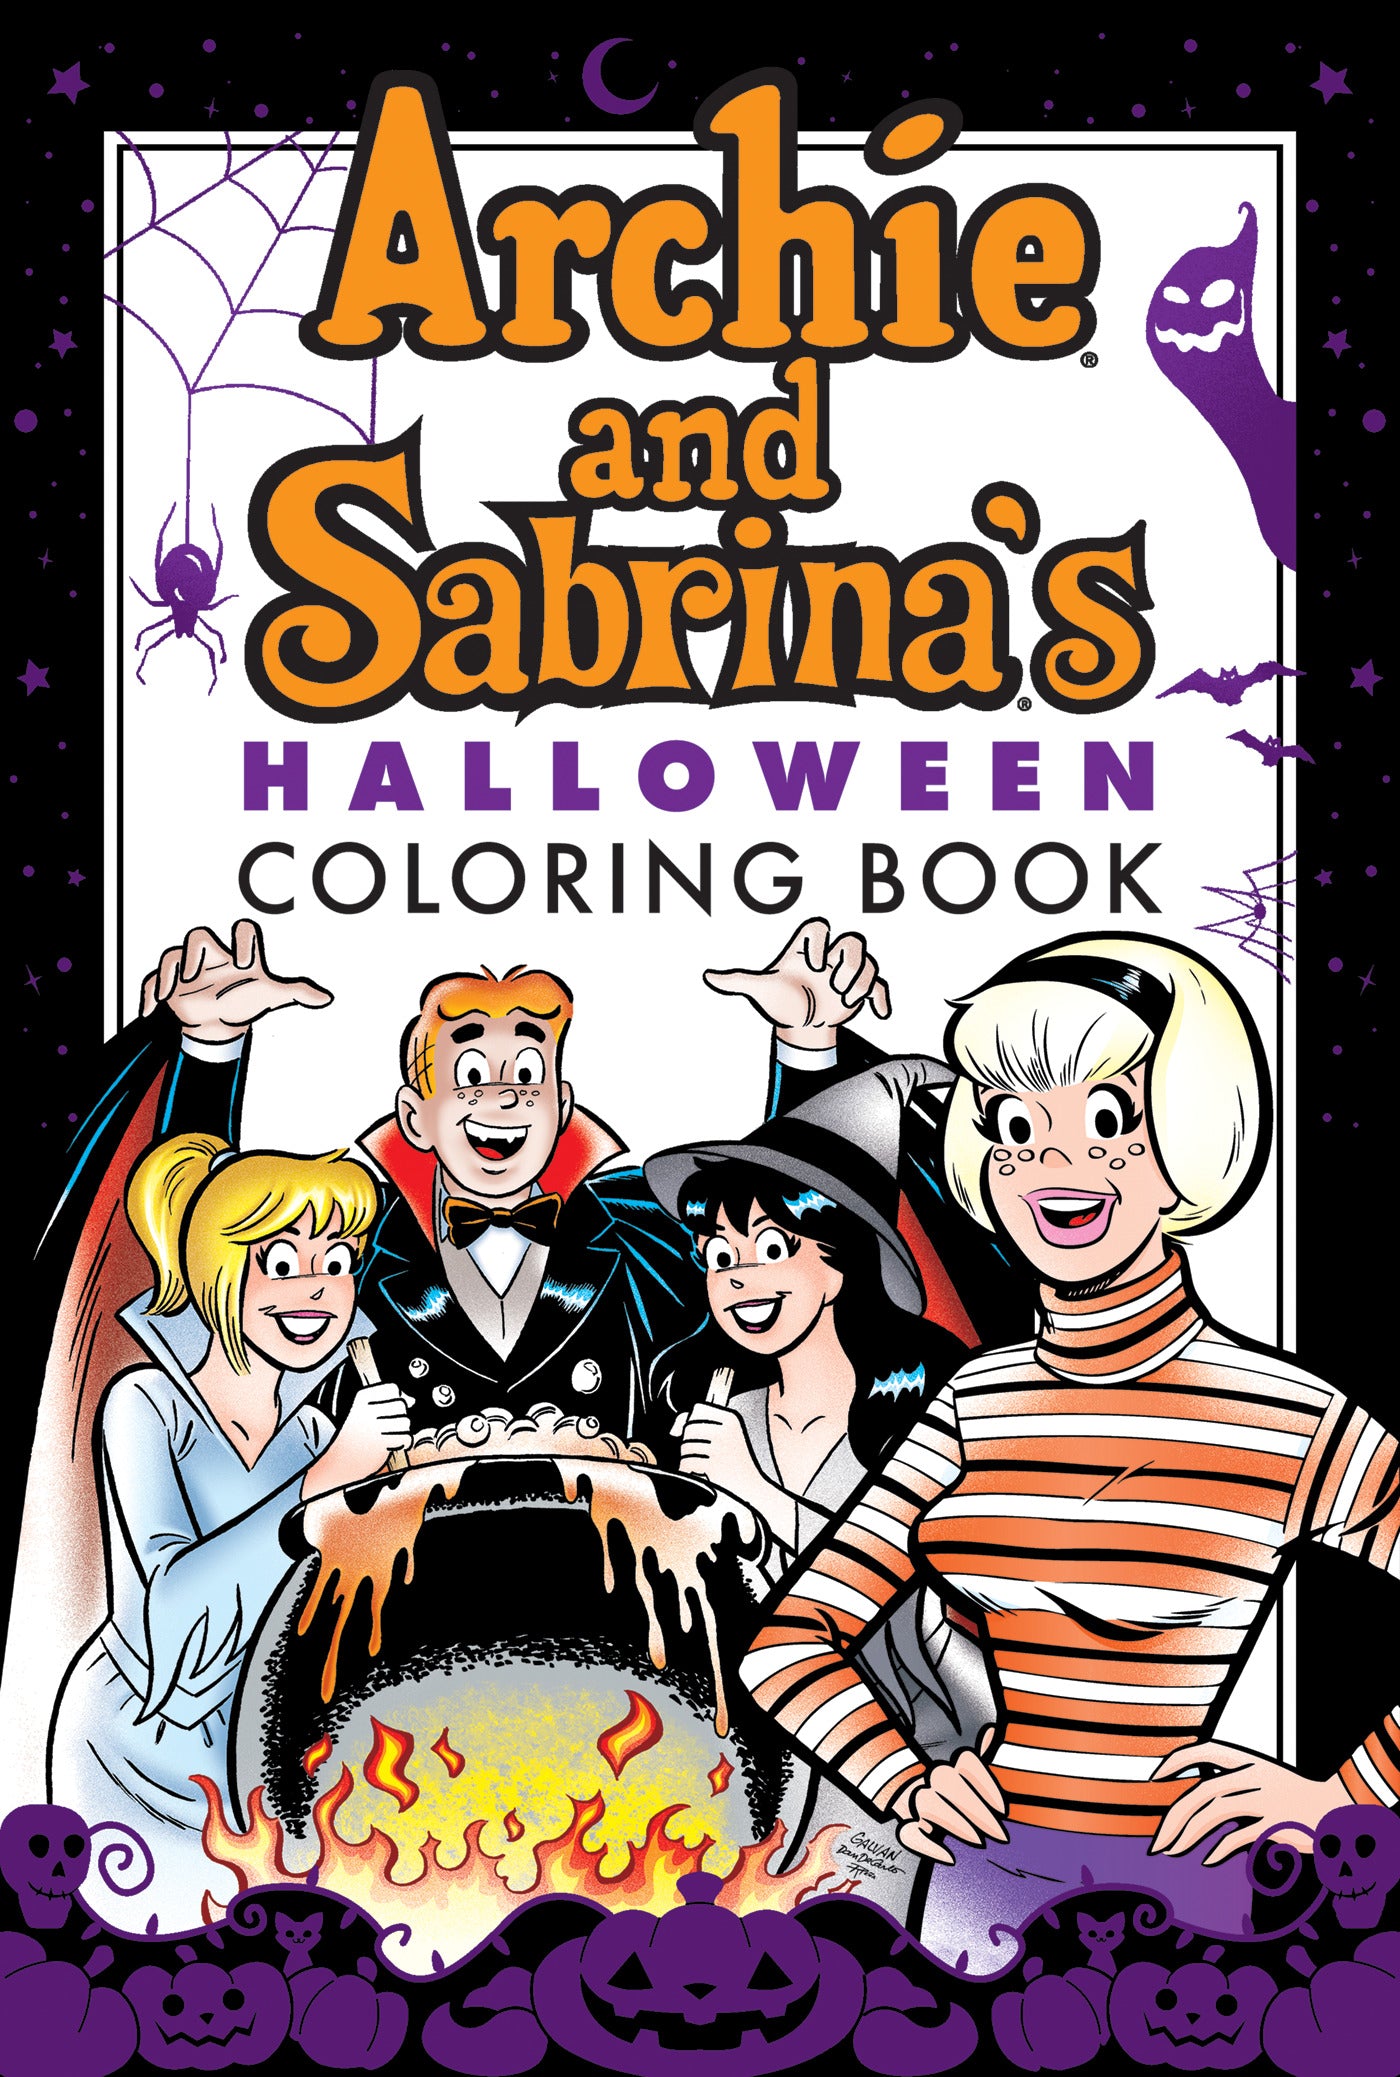 Archie &amp; Sabrina's Halloween Coloring Book